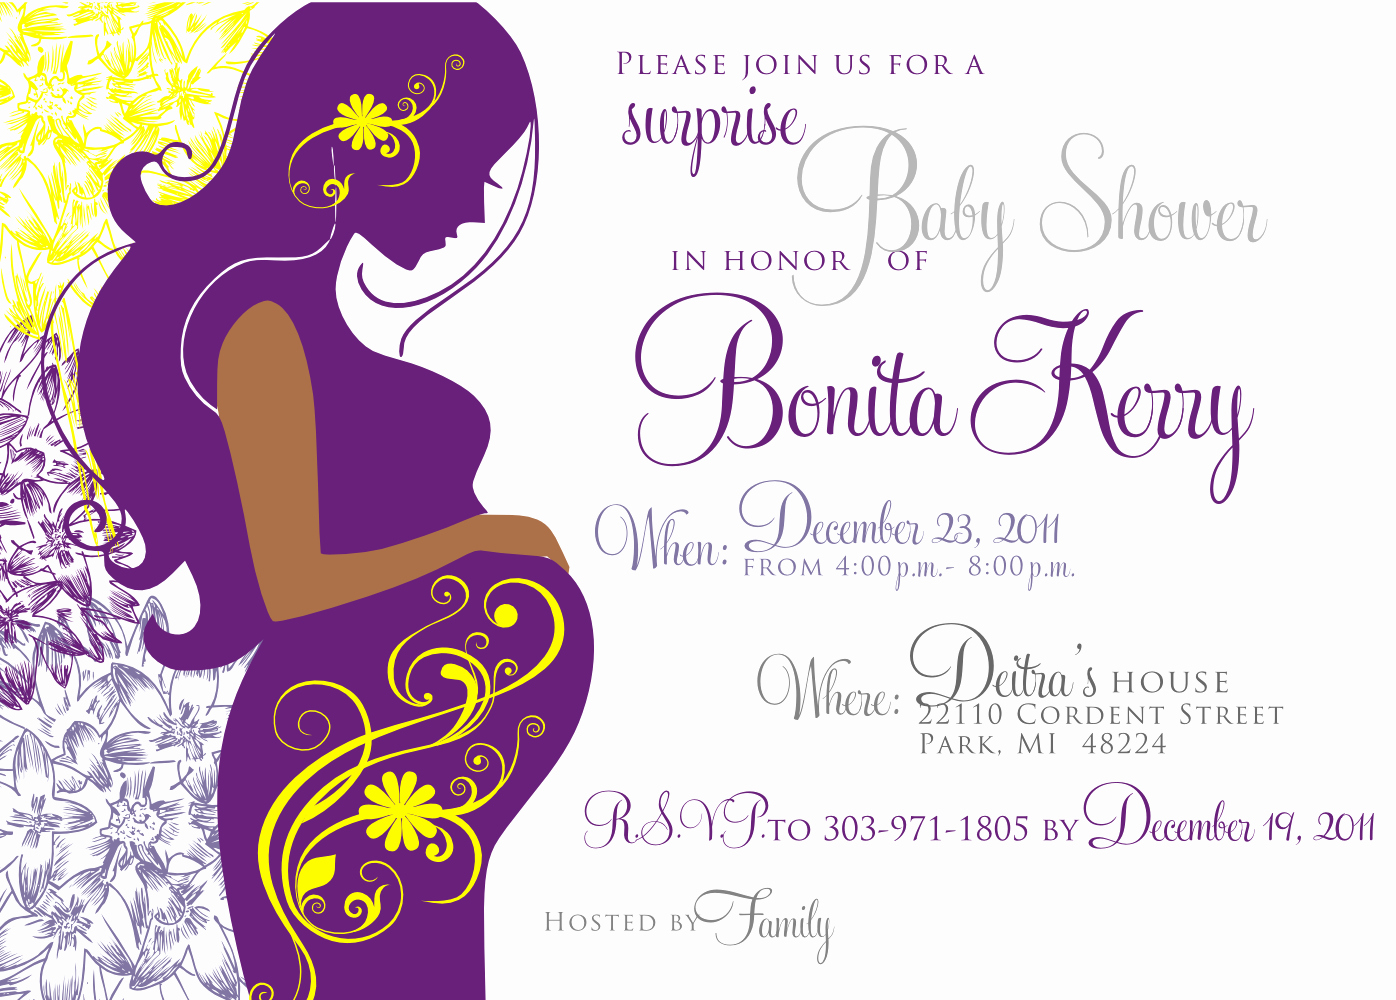 Baby Shower Invitation Images Lovely Free Baby Shower Download Free Clip Art Free Clip Art On